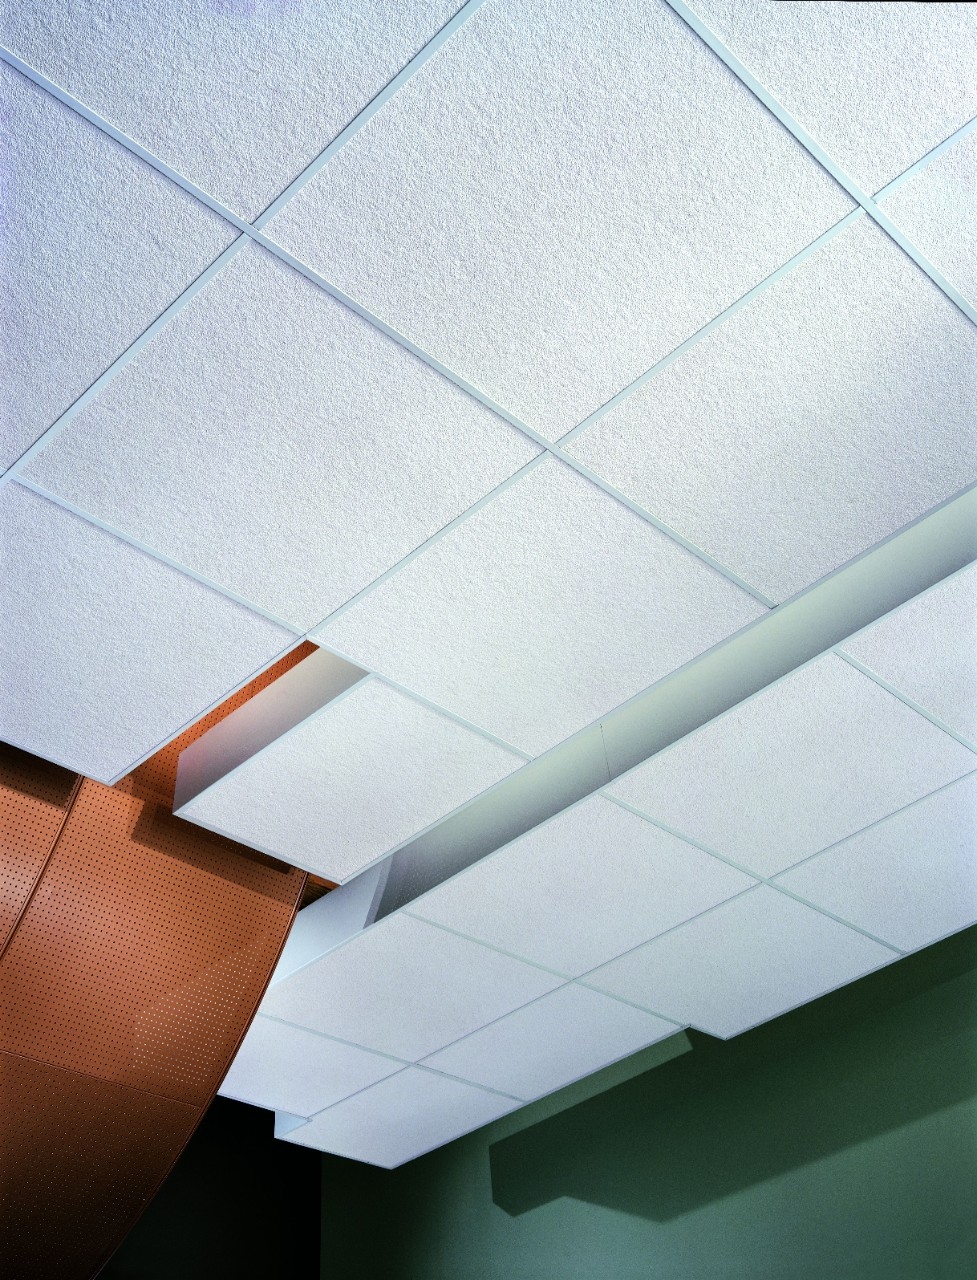 Fire Rated Ceiling Tiles 2×2